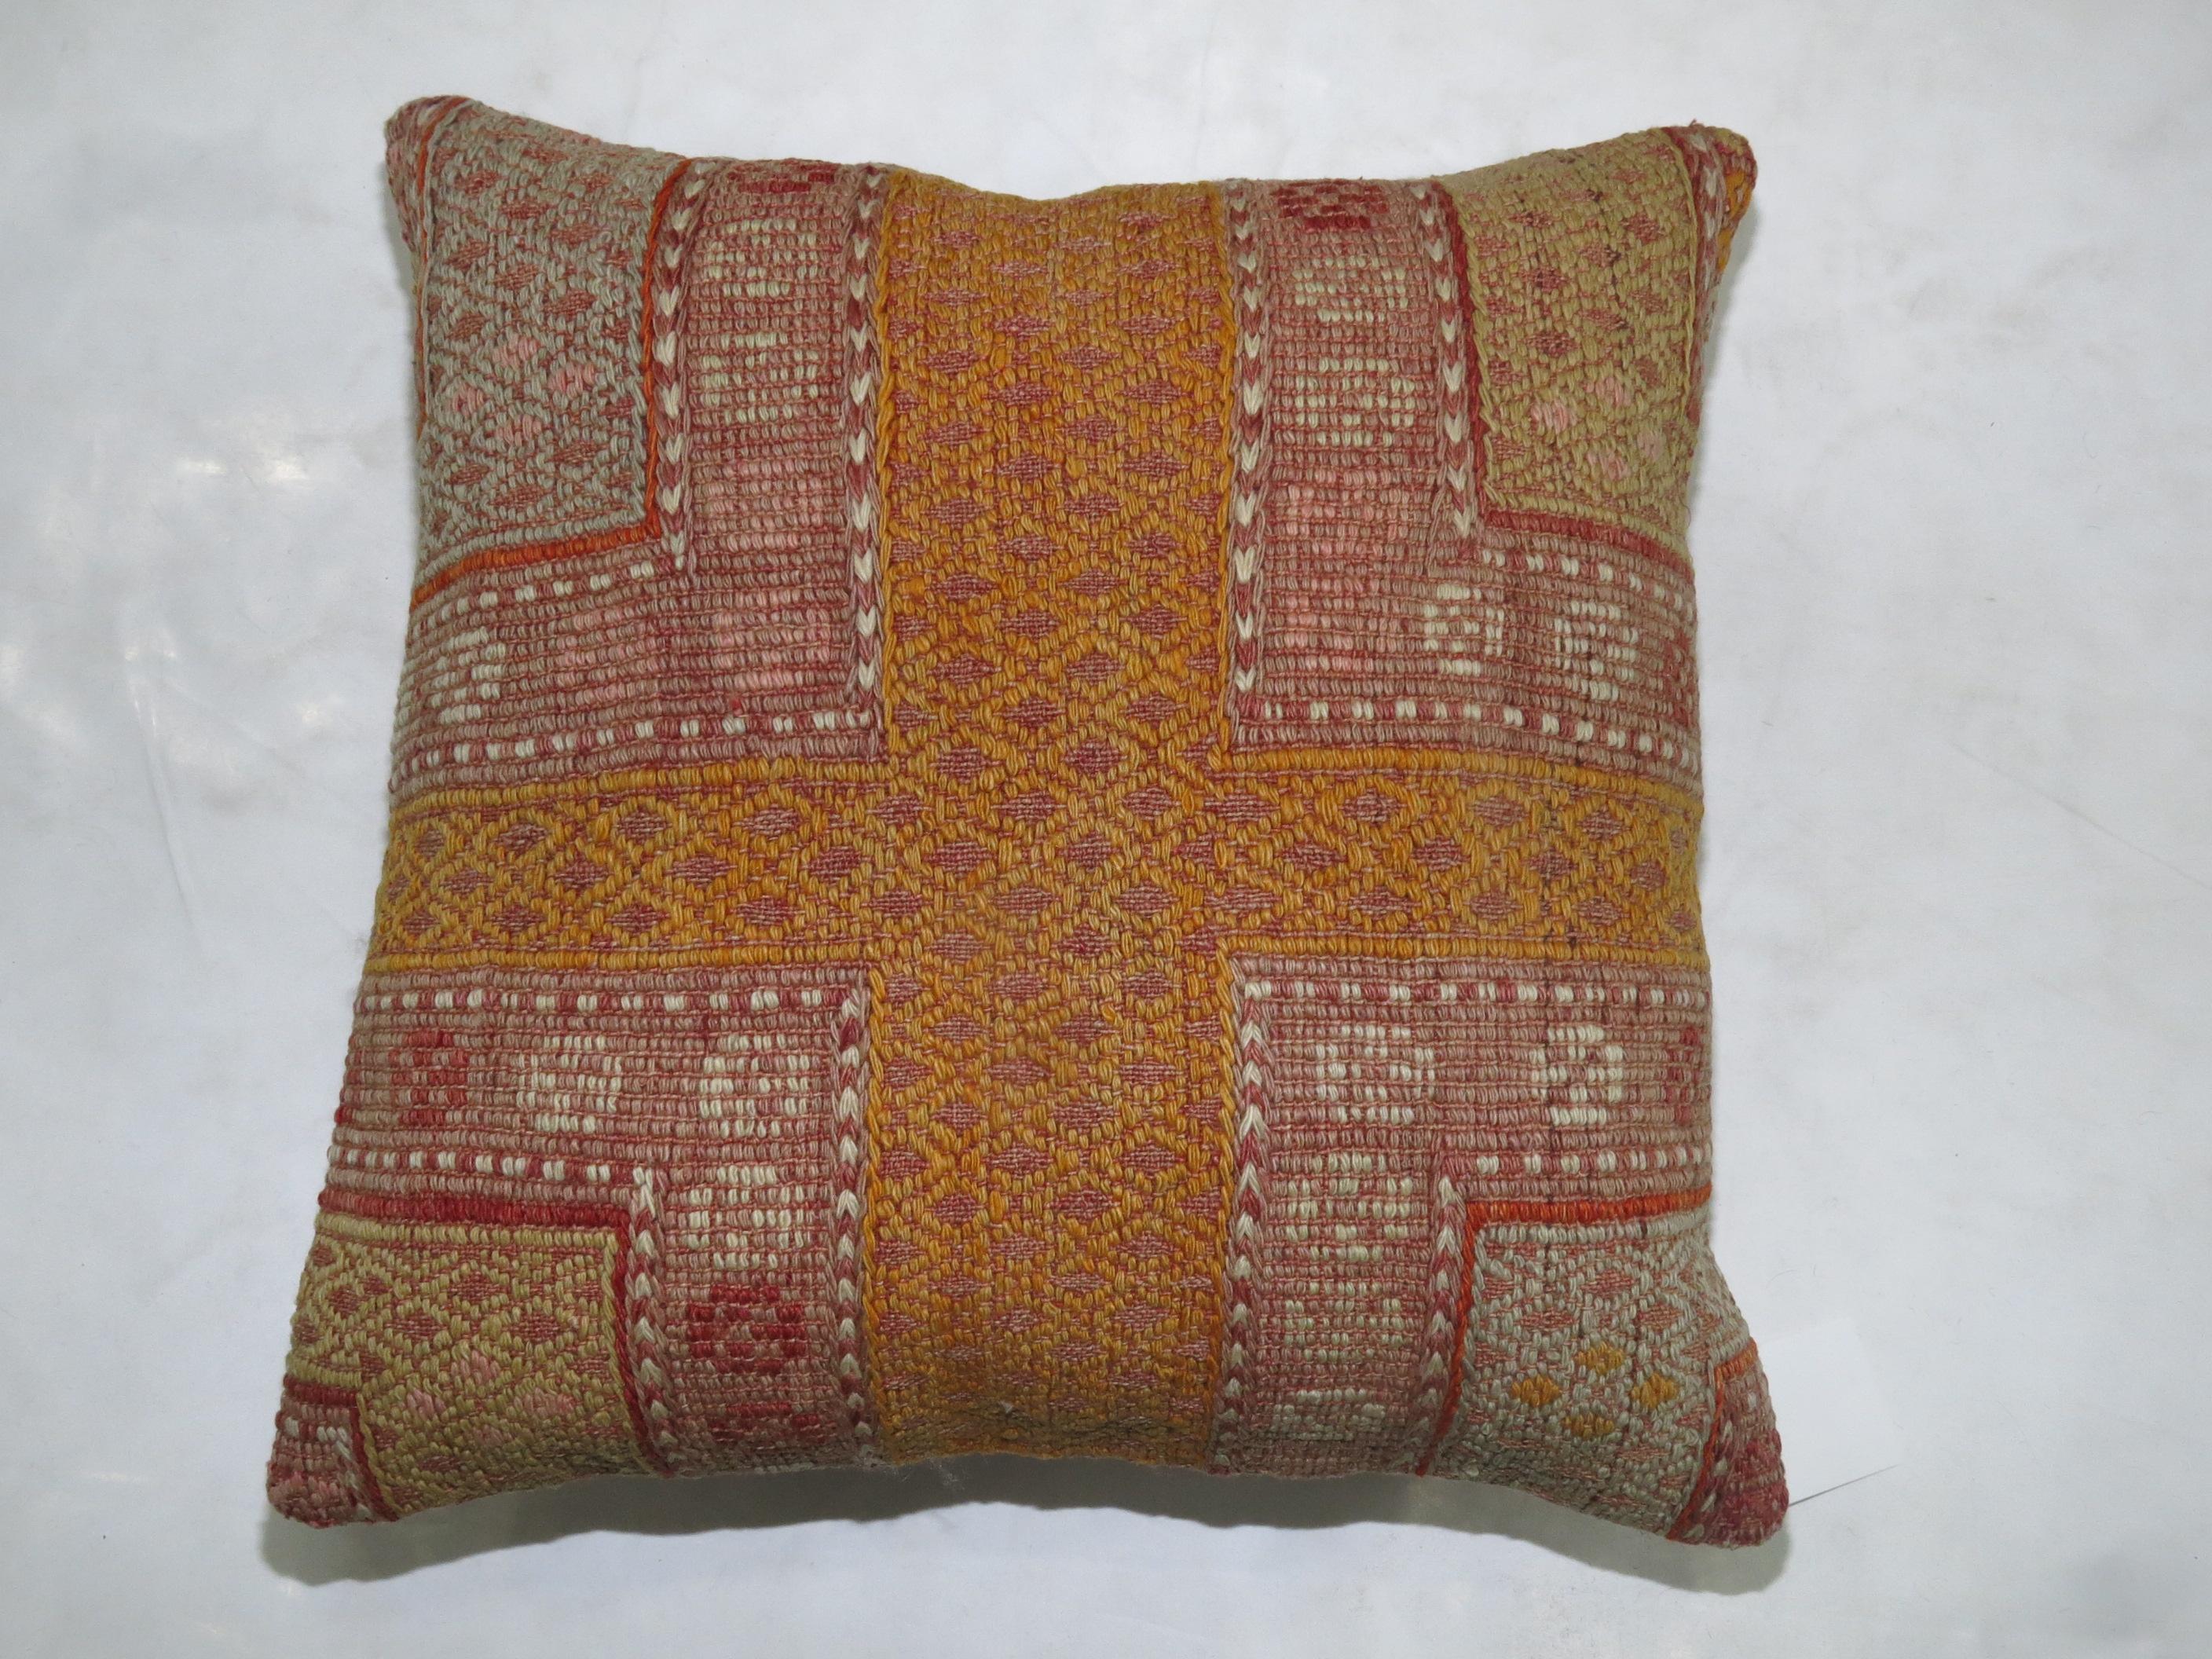 Large pillow made from a colorful Turkish Jajim flat-weave.

Measures: 20” x 20”.